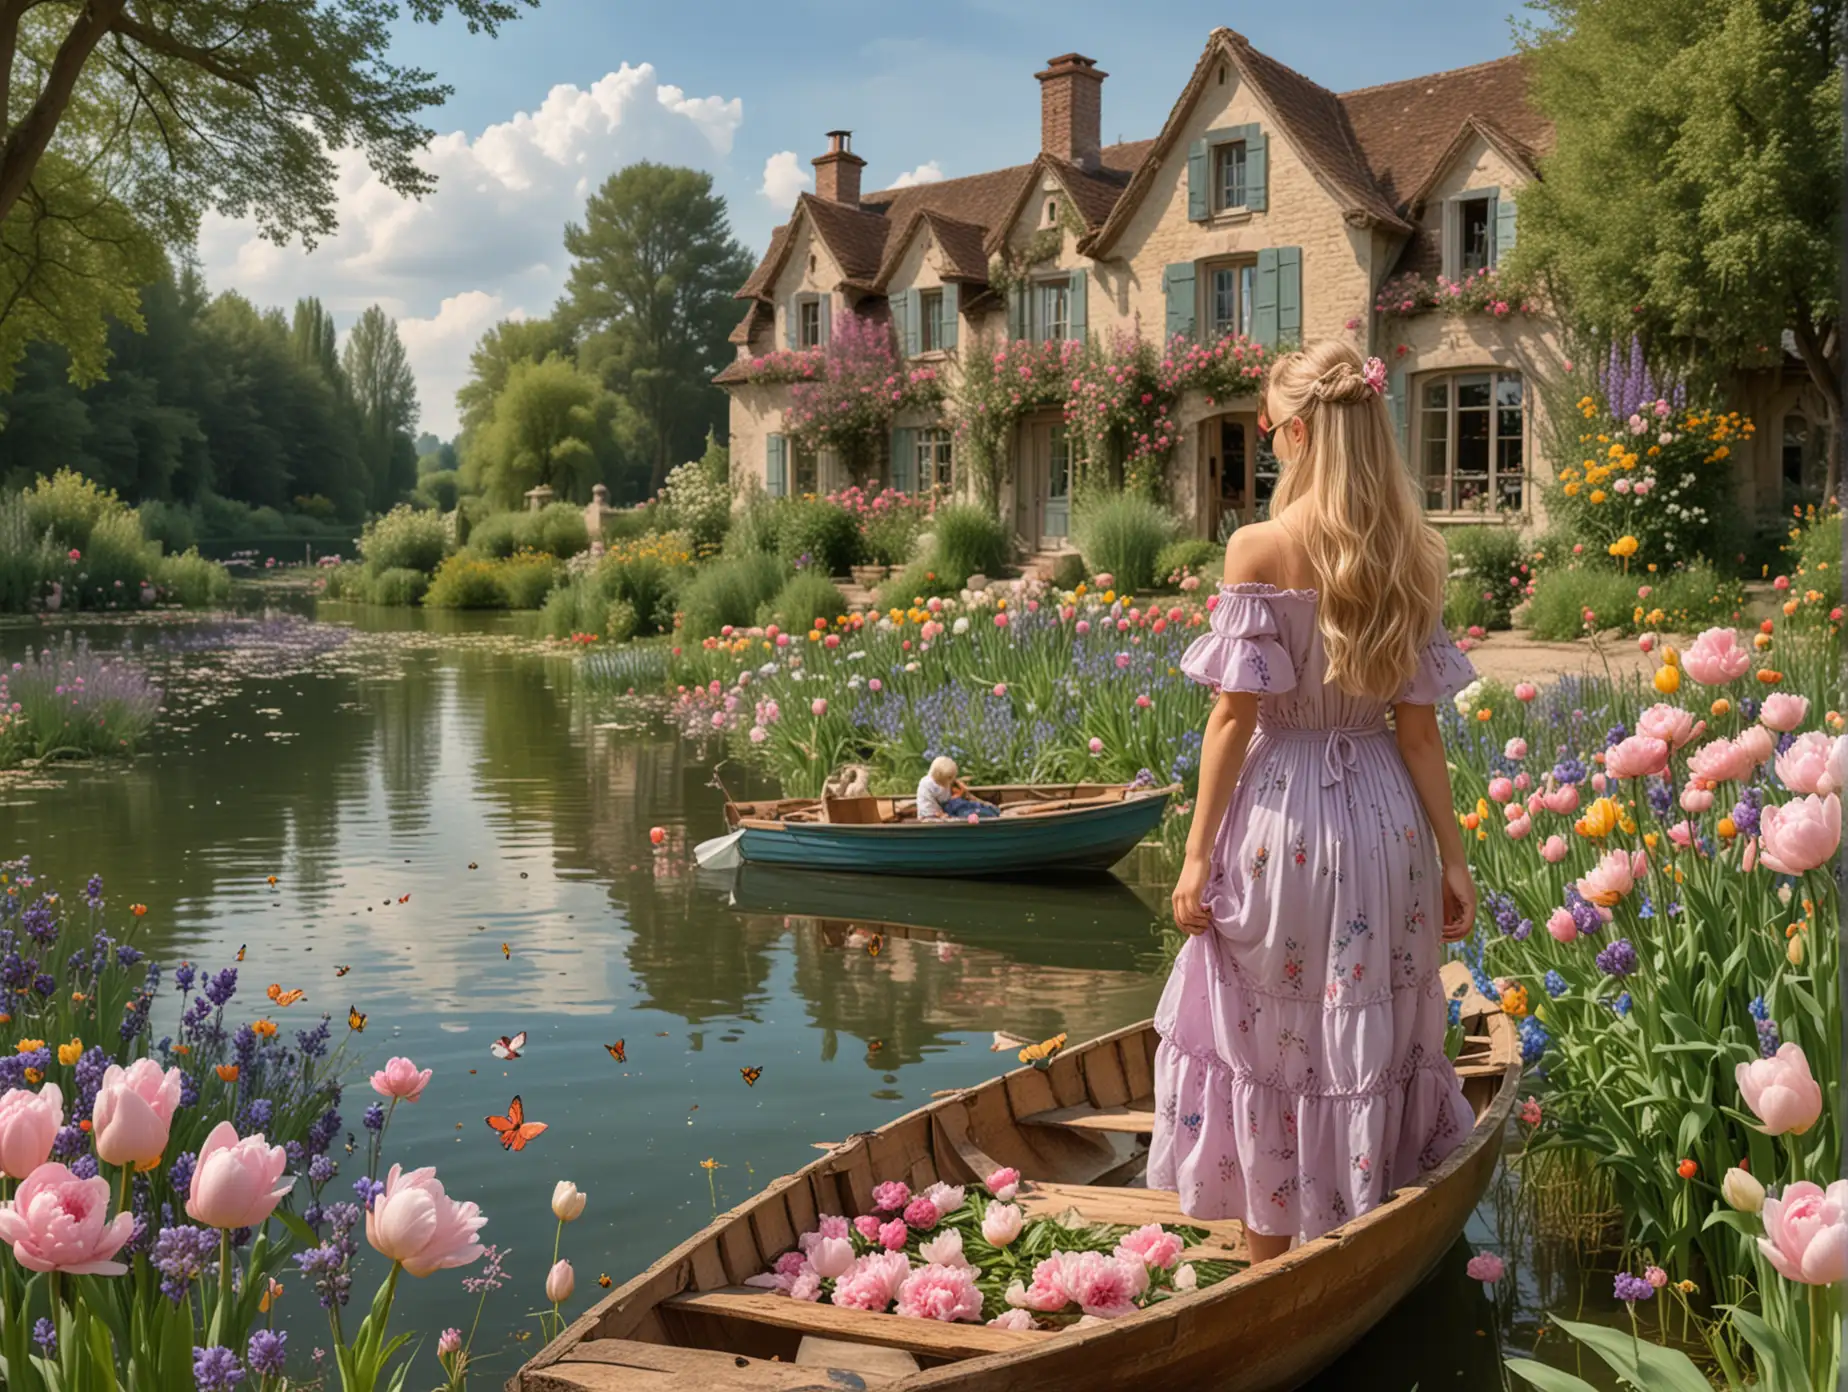 Charming-French-Country-Cottage-Blooming-Garden-and-Lakeside-Serenity